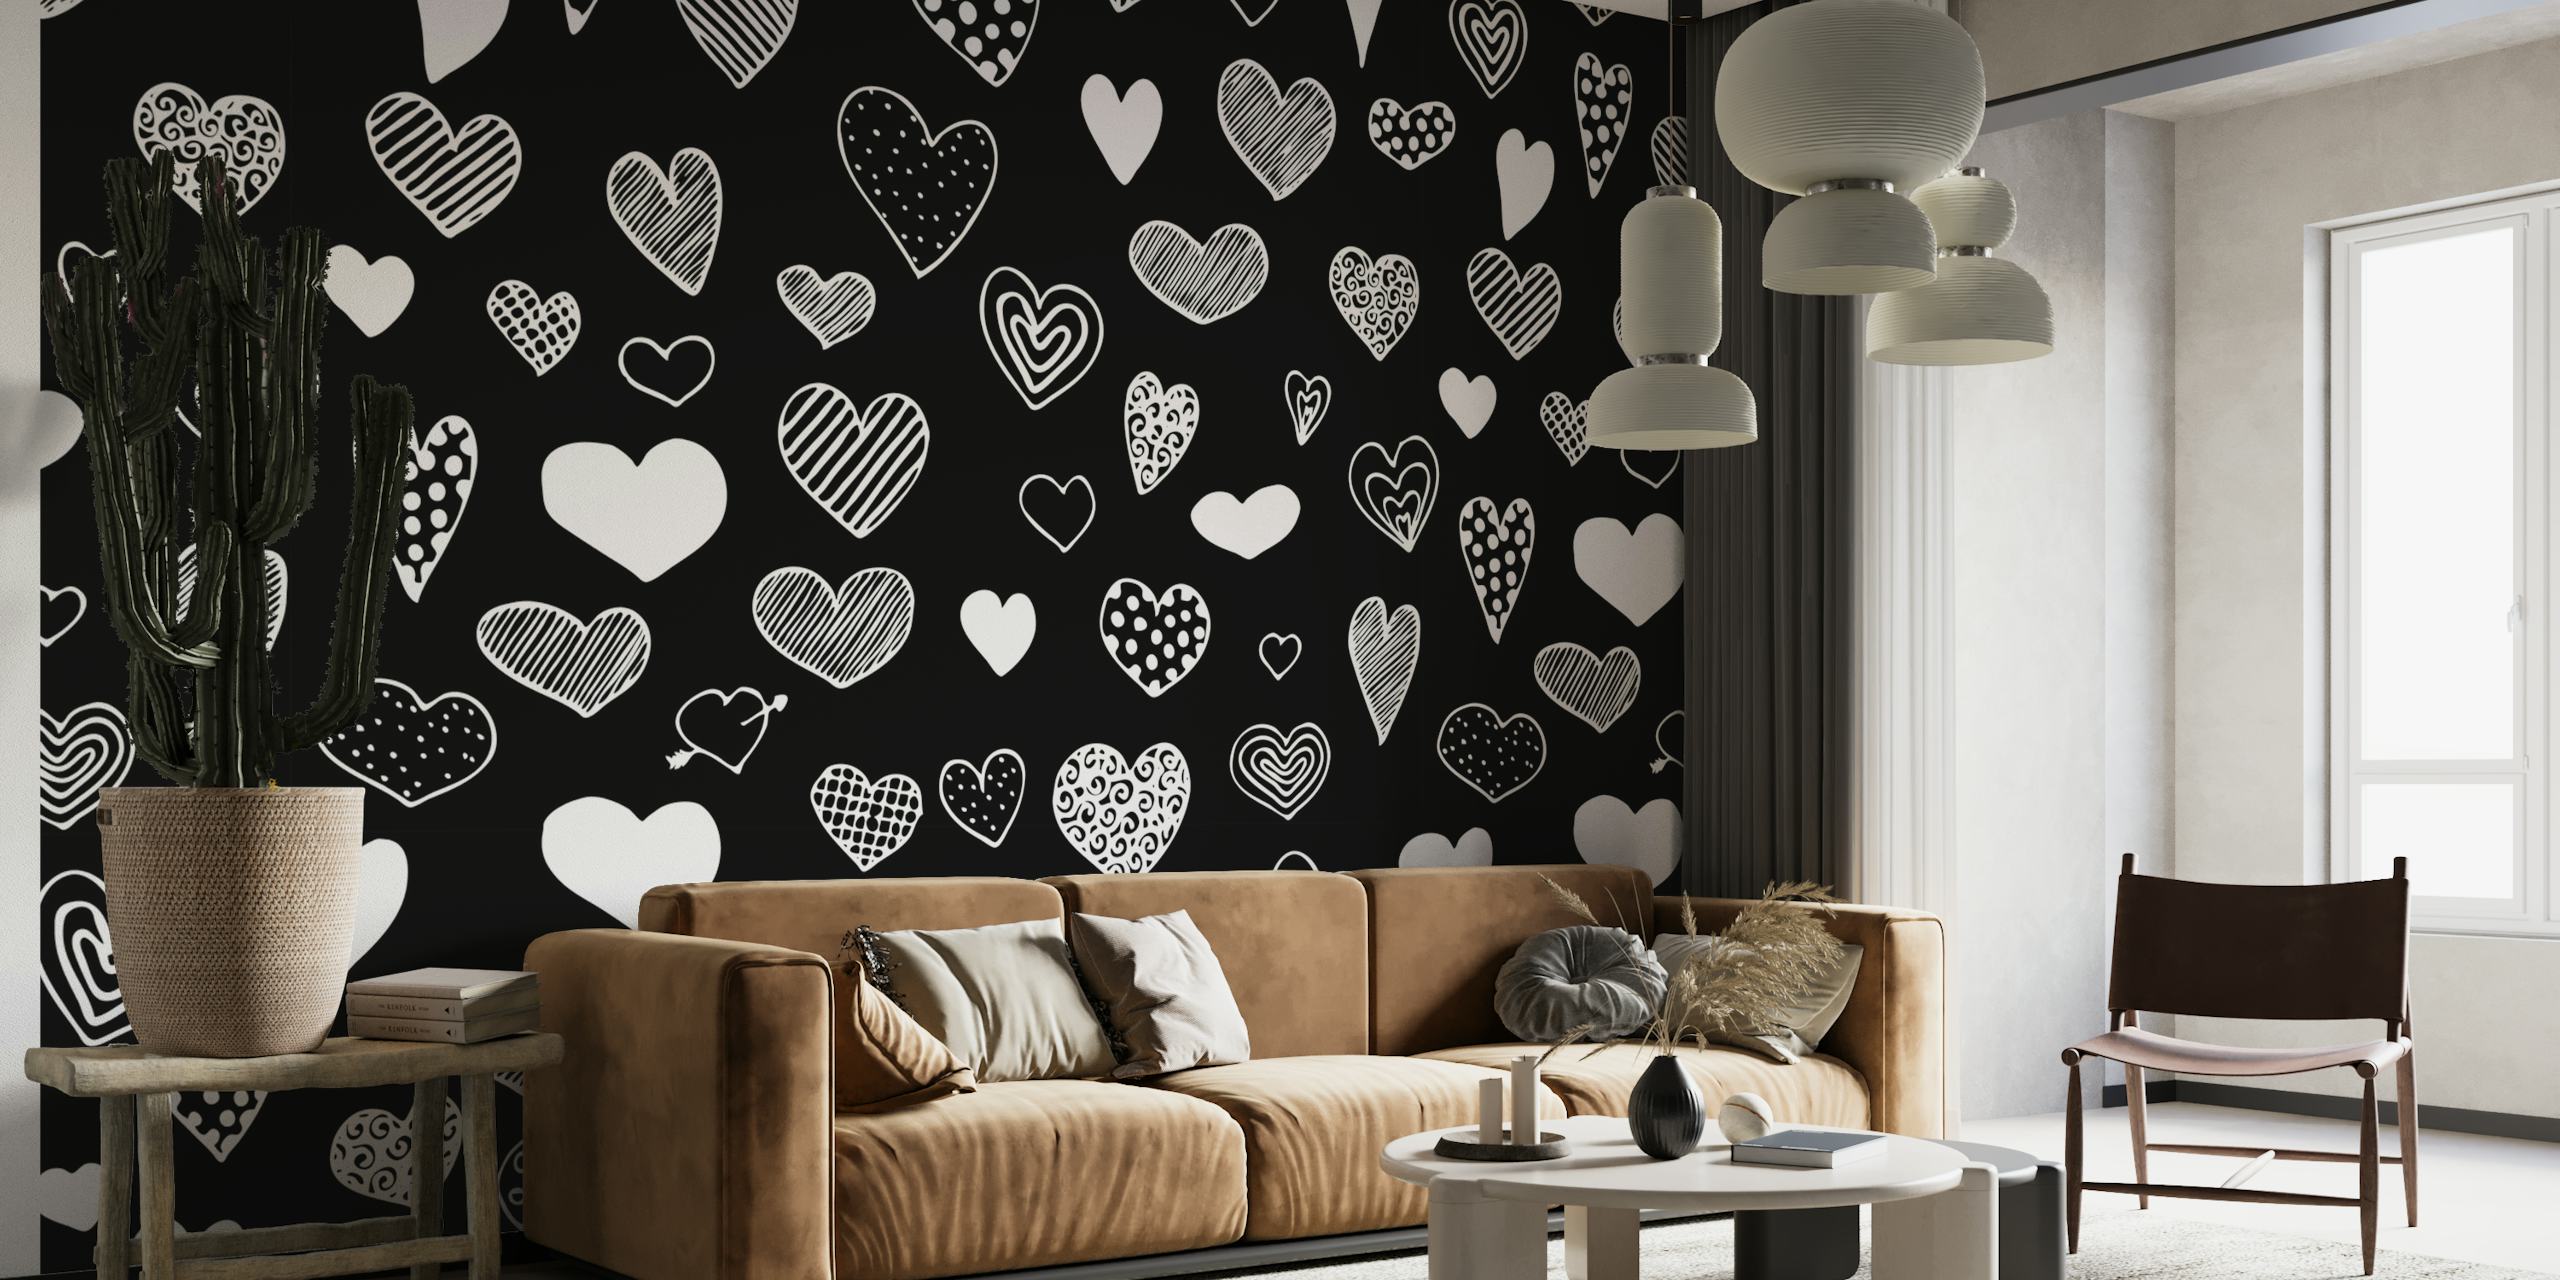 Heart Doodles Black and White behang